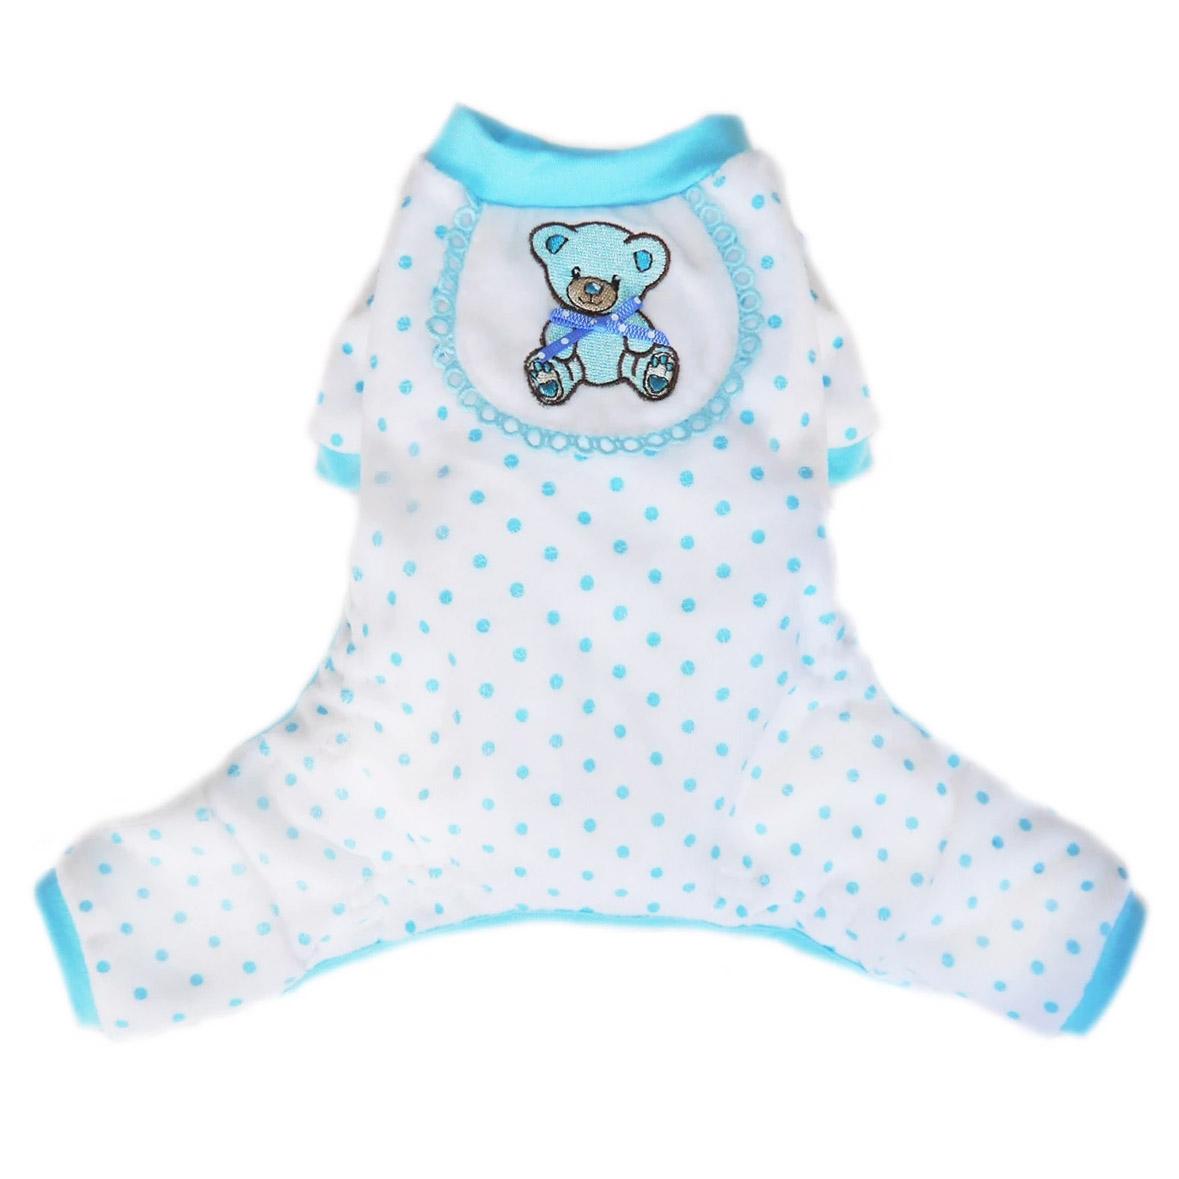 Pooch Outfitters Teddy Bear Dog Pajamas - Blue